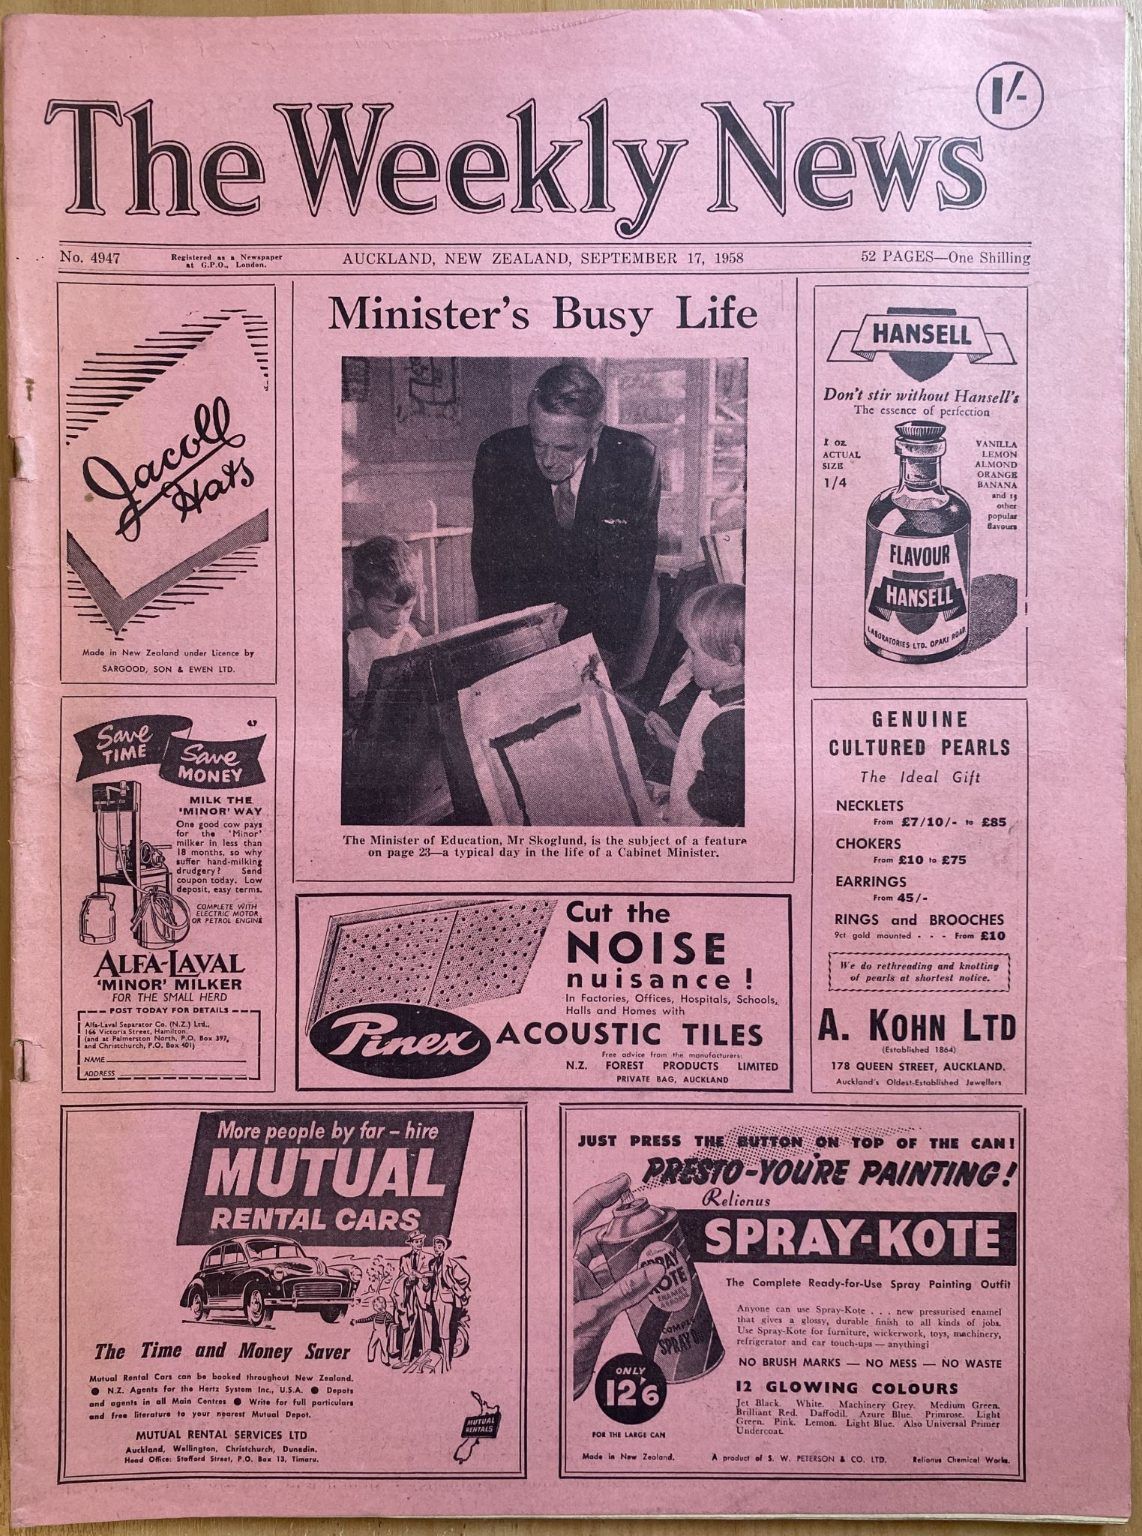 OLD NEWSPAPER: The Weekly News, No. 4947, 17 September 1958